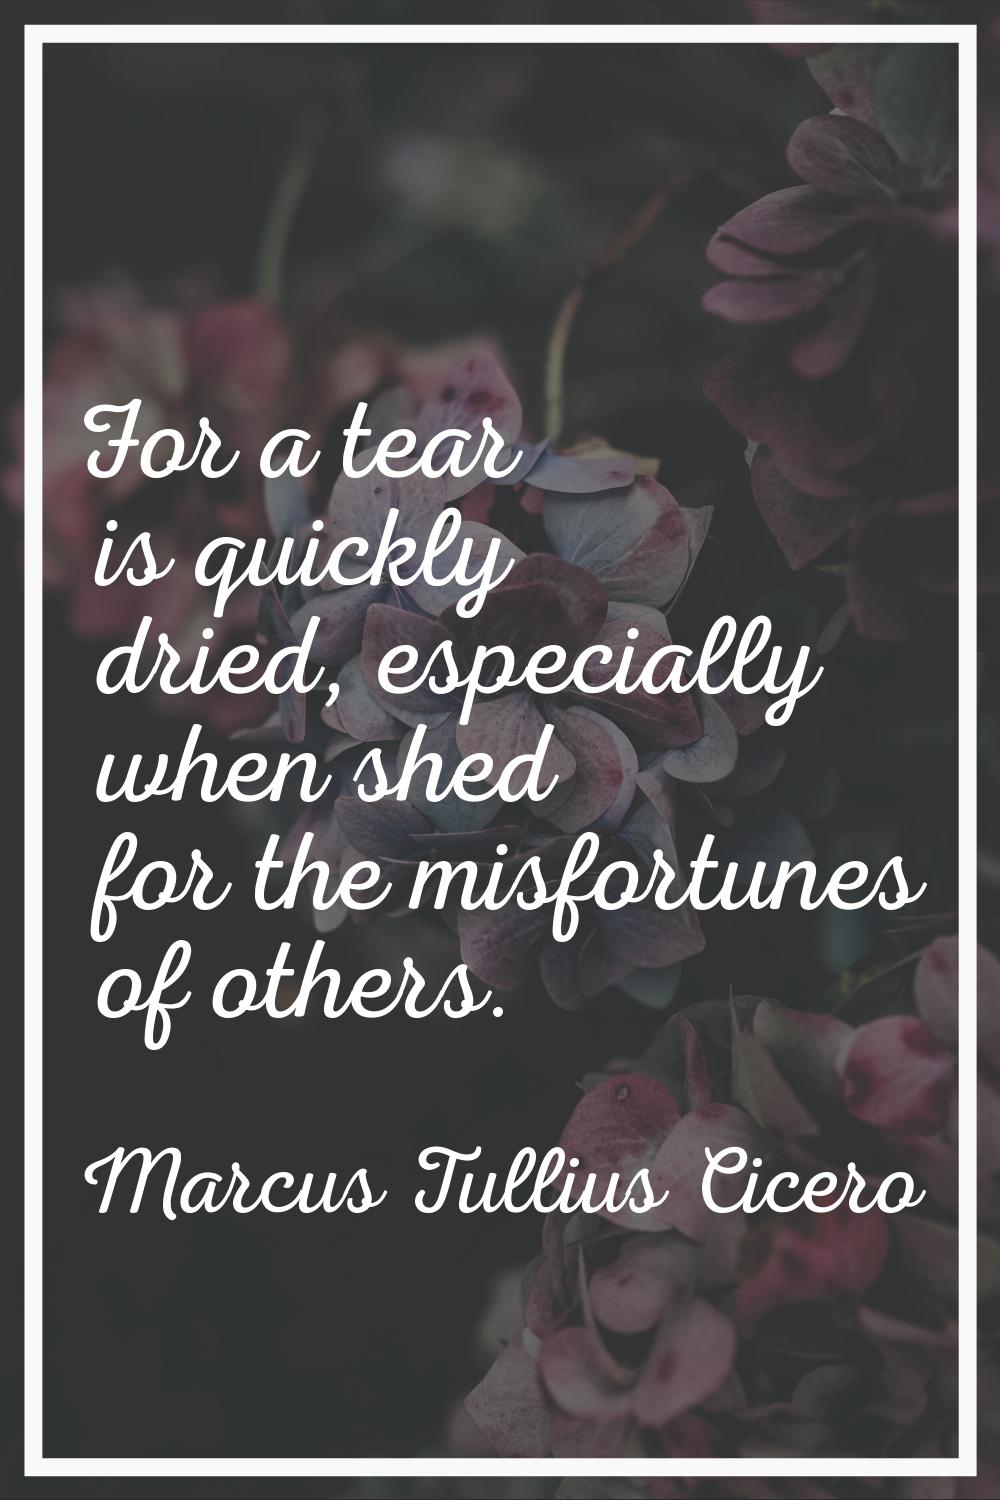 For a tear is quickly dried, especially when shed for the misfortunes of others.